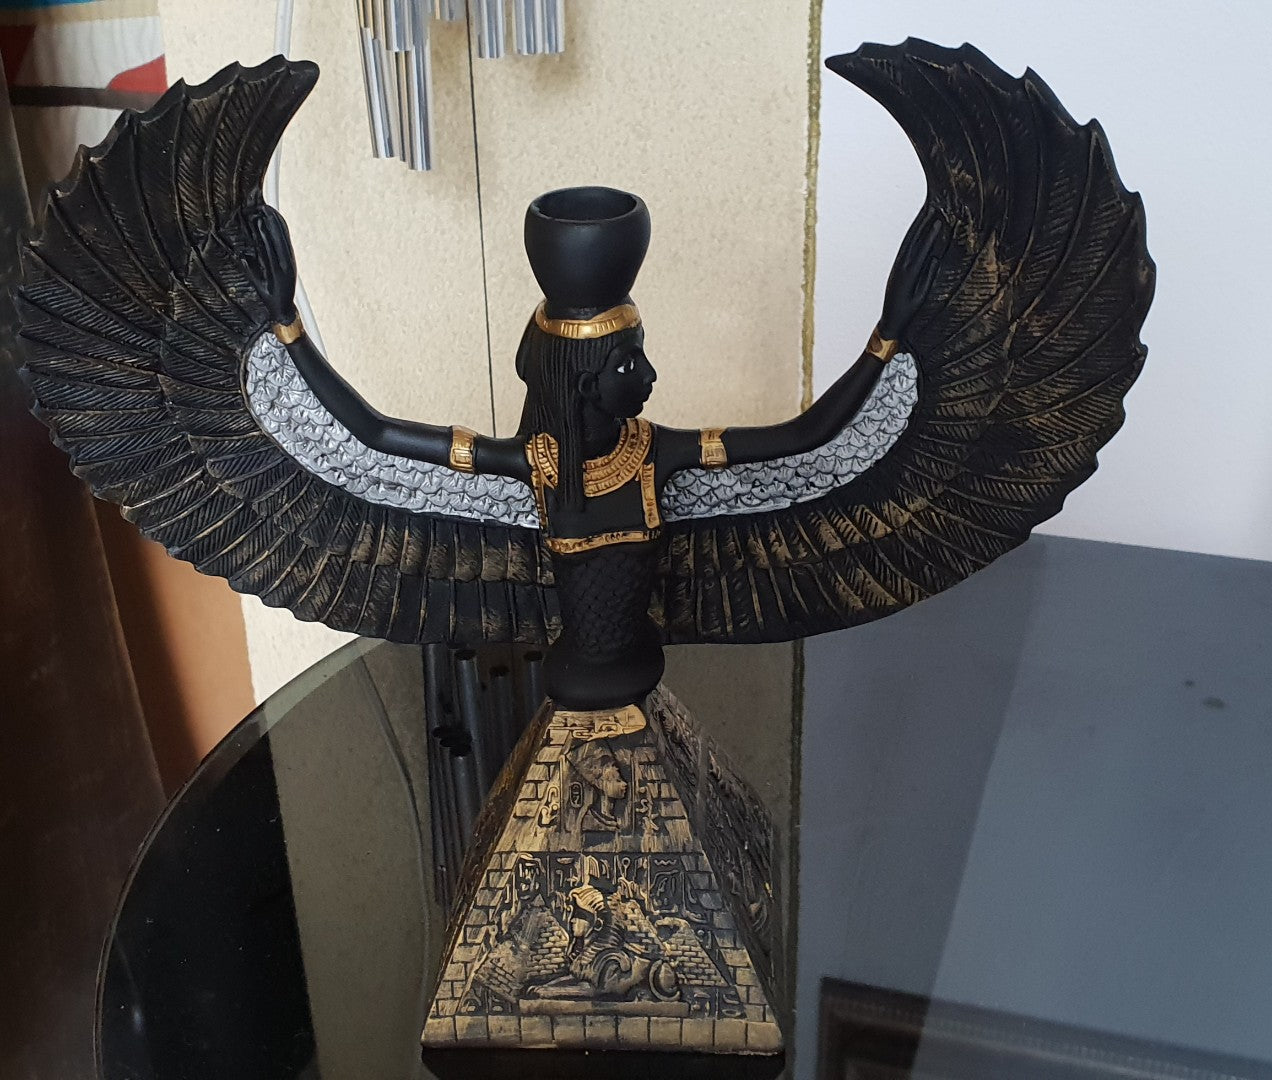 isis-statue-23-cm-tall-black-gold-candle-holder-single-handmade-in-egypt